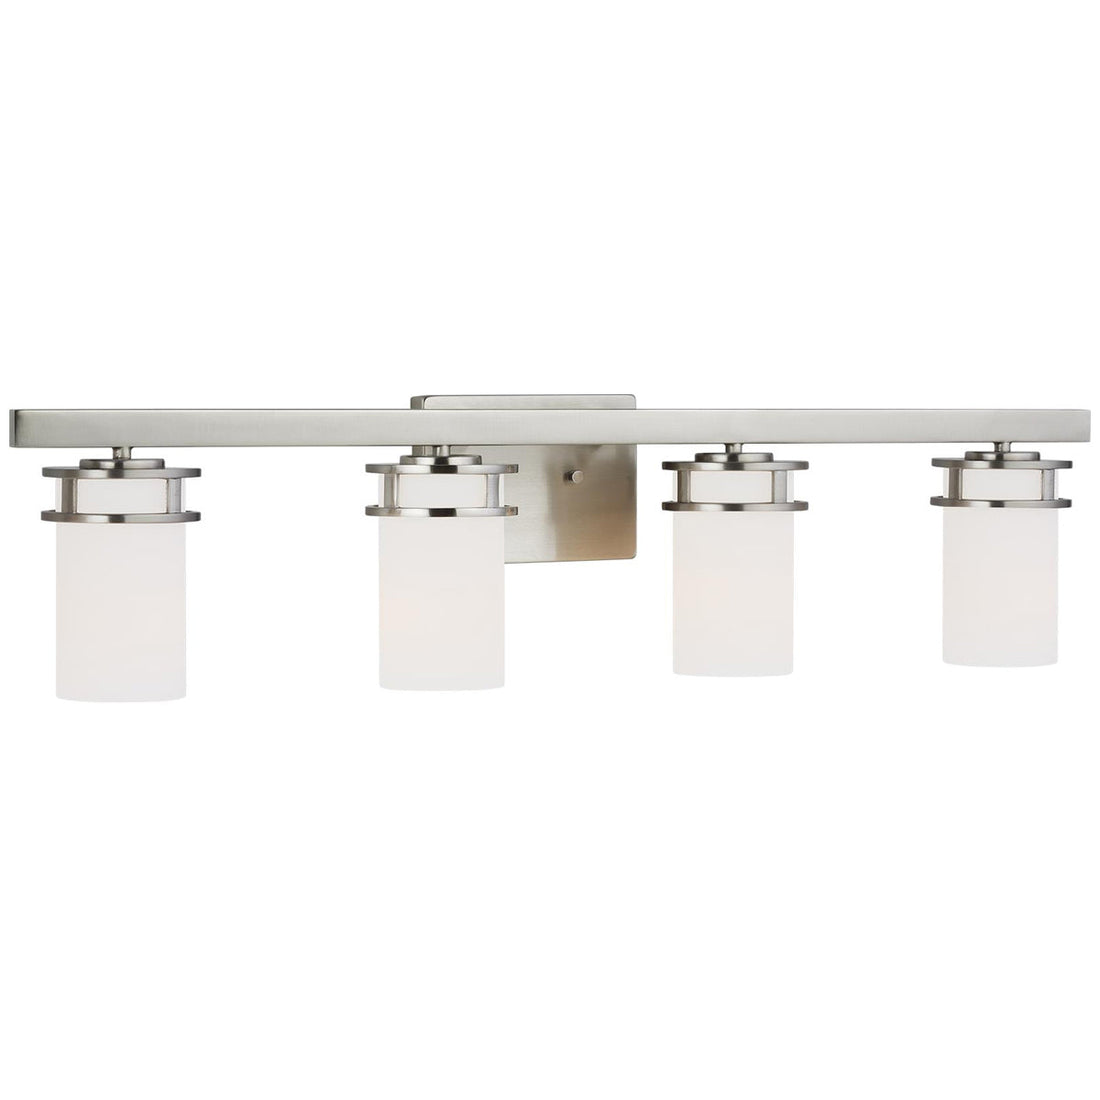 Sea Gull Lighting Robie 4-Light Wall/Bath Sconce without Bulb